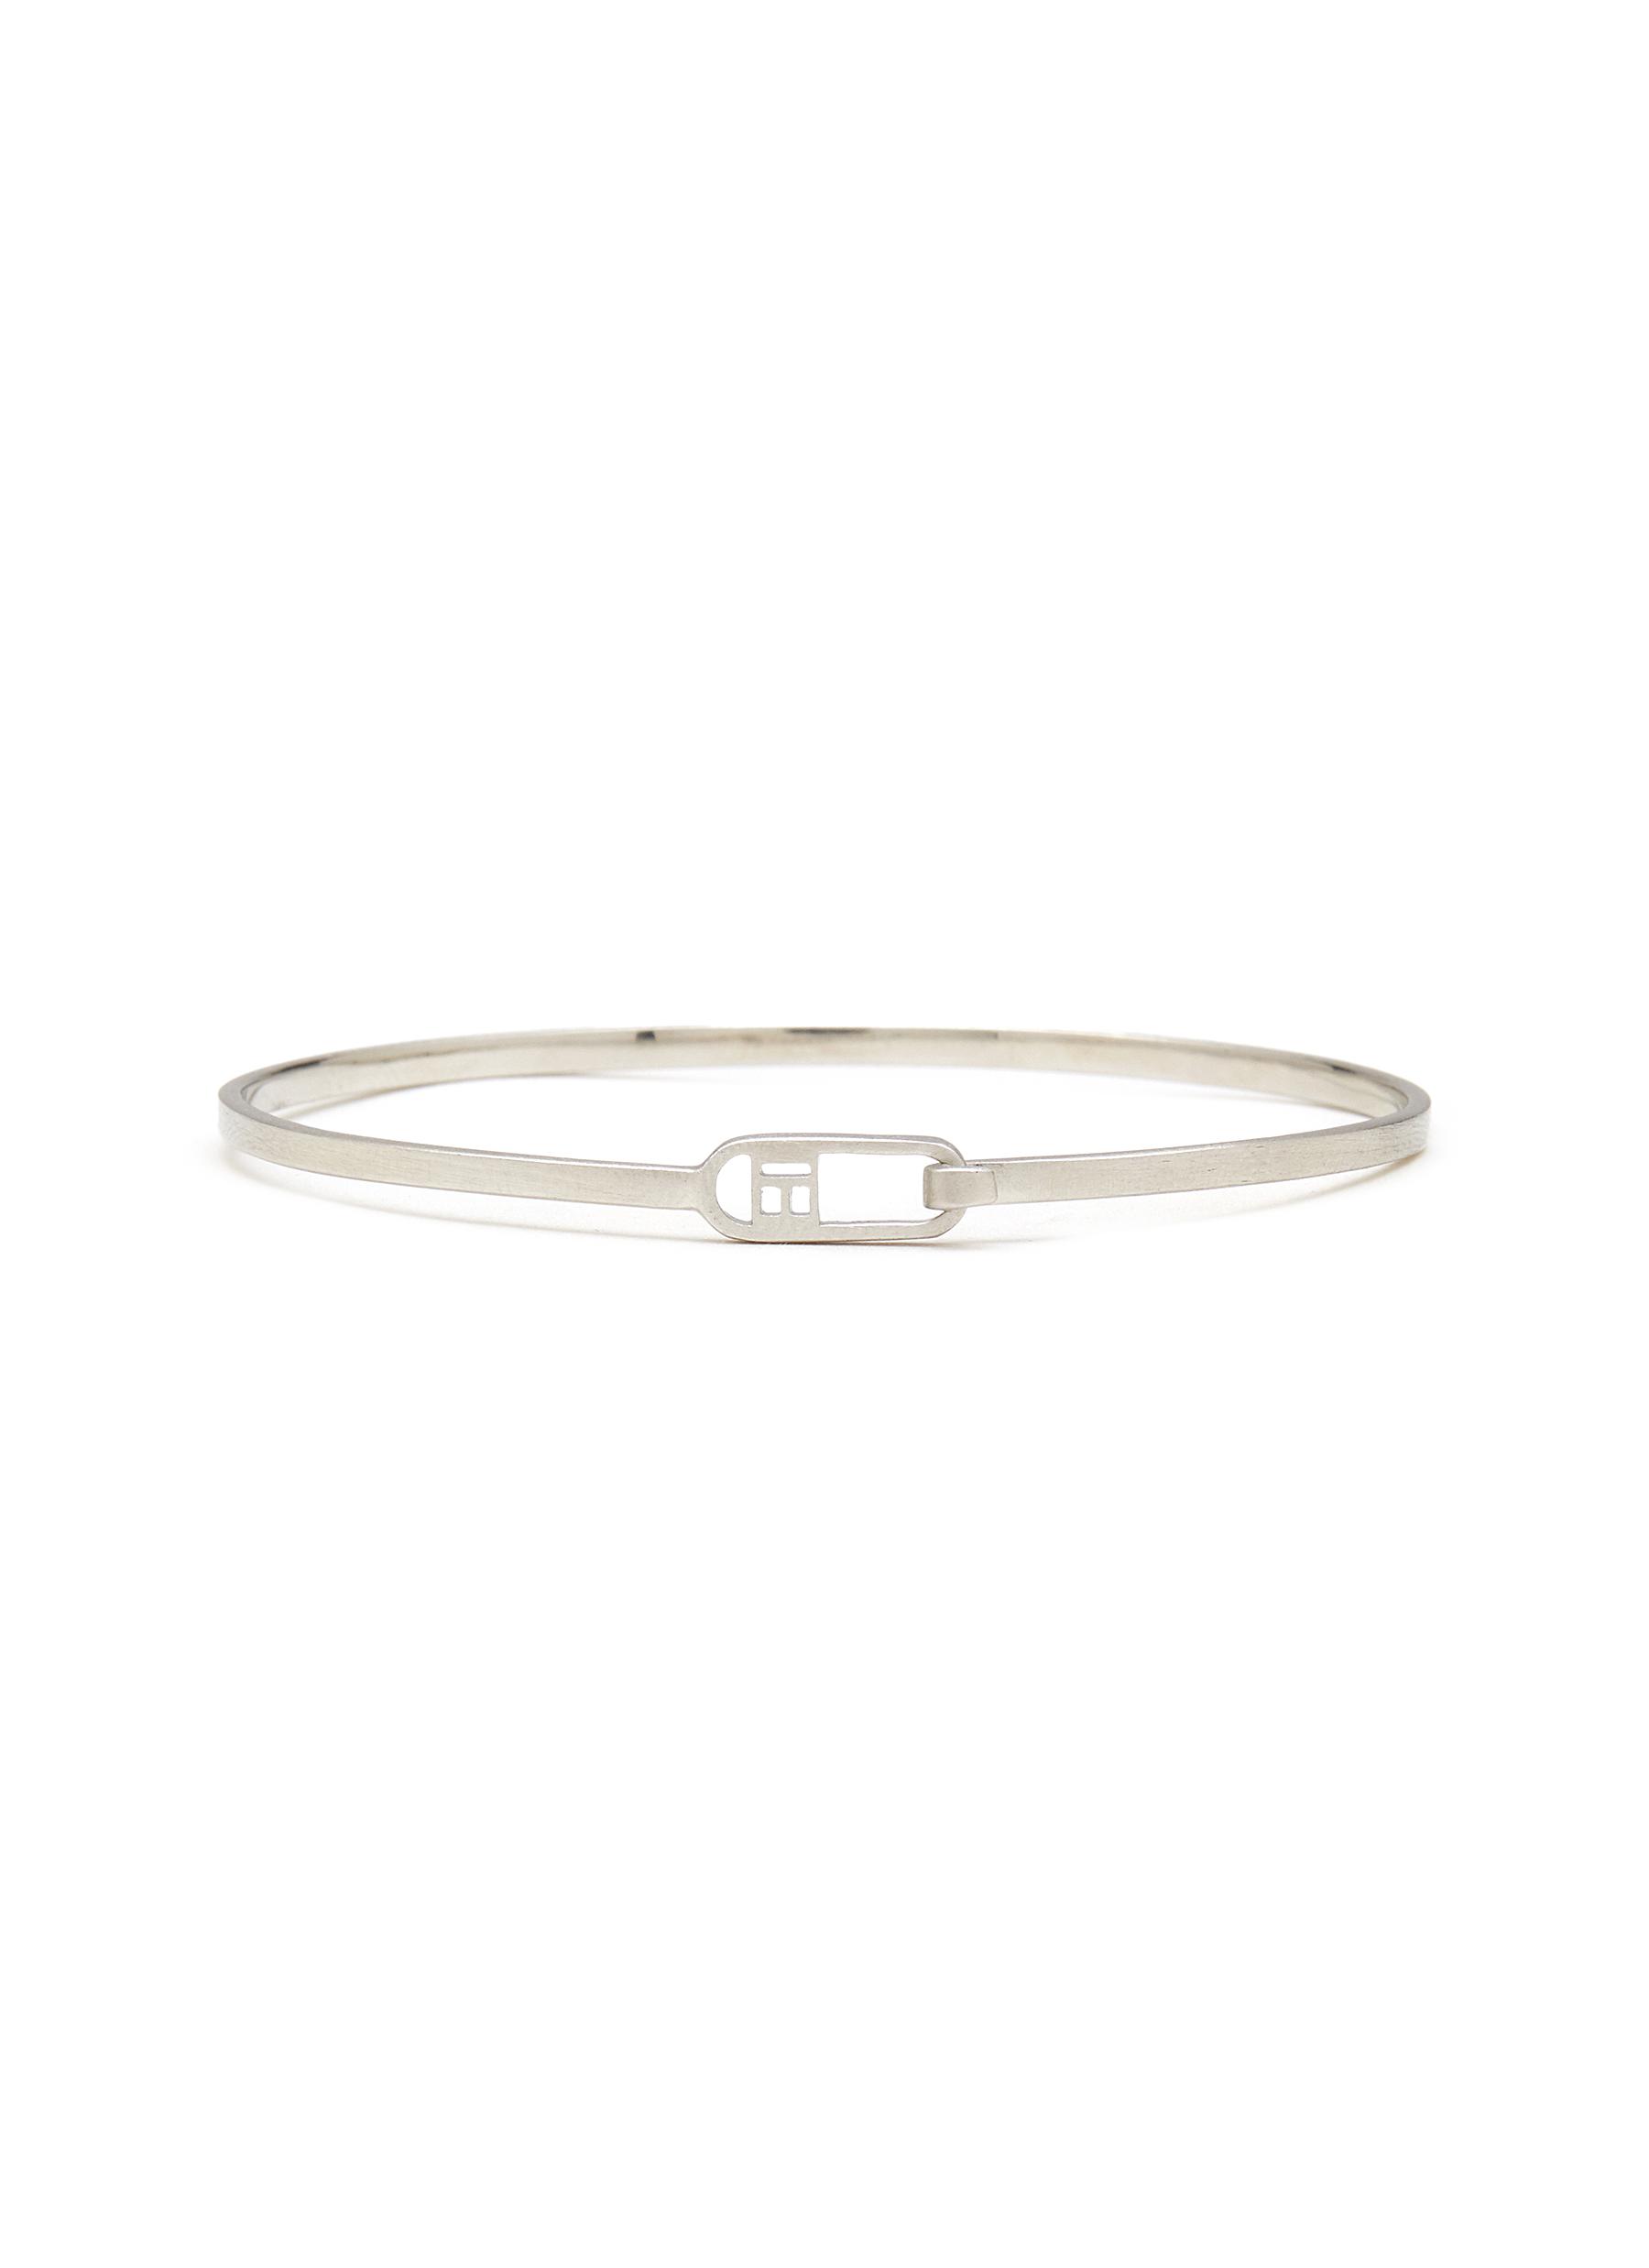 Brushed Rhodium Plated Sterling Silver T-Bangle